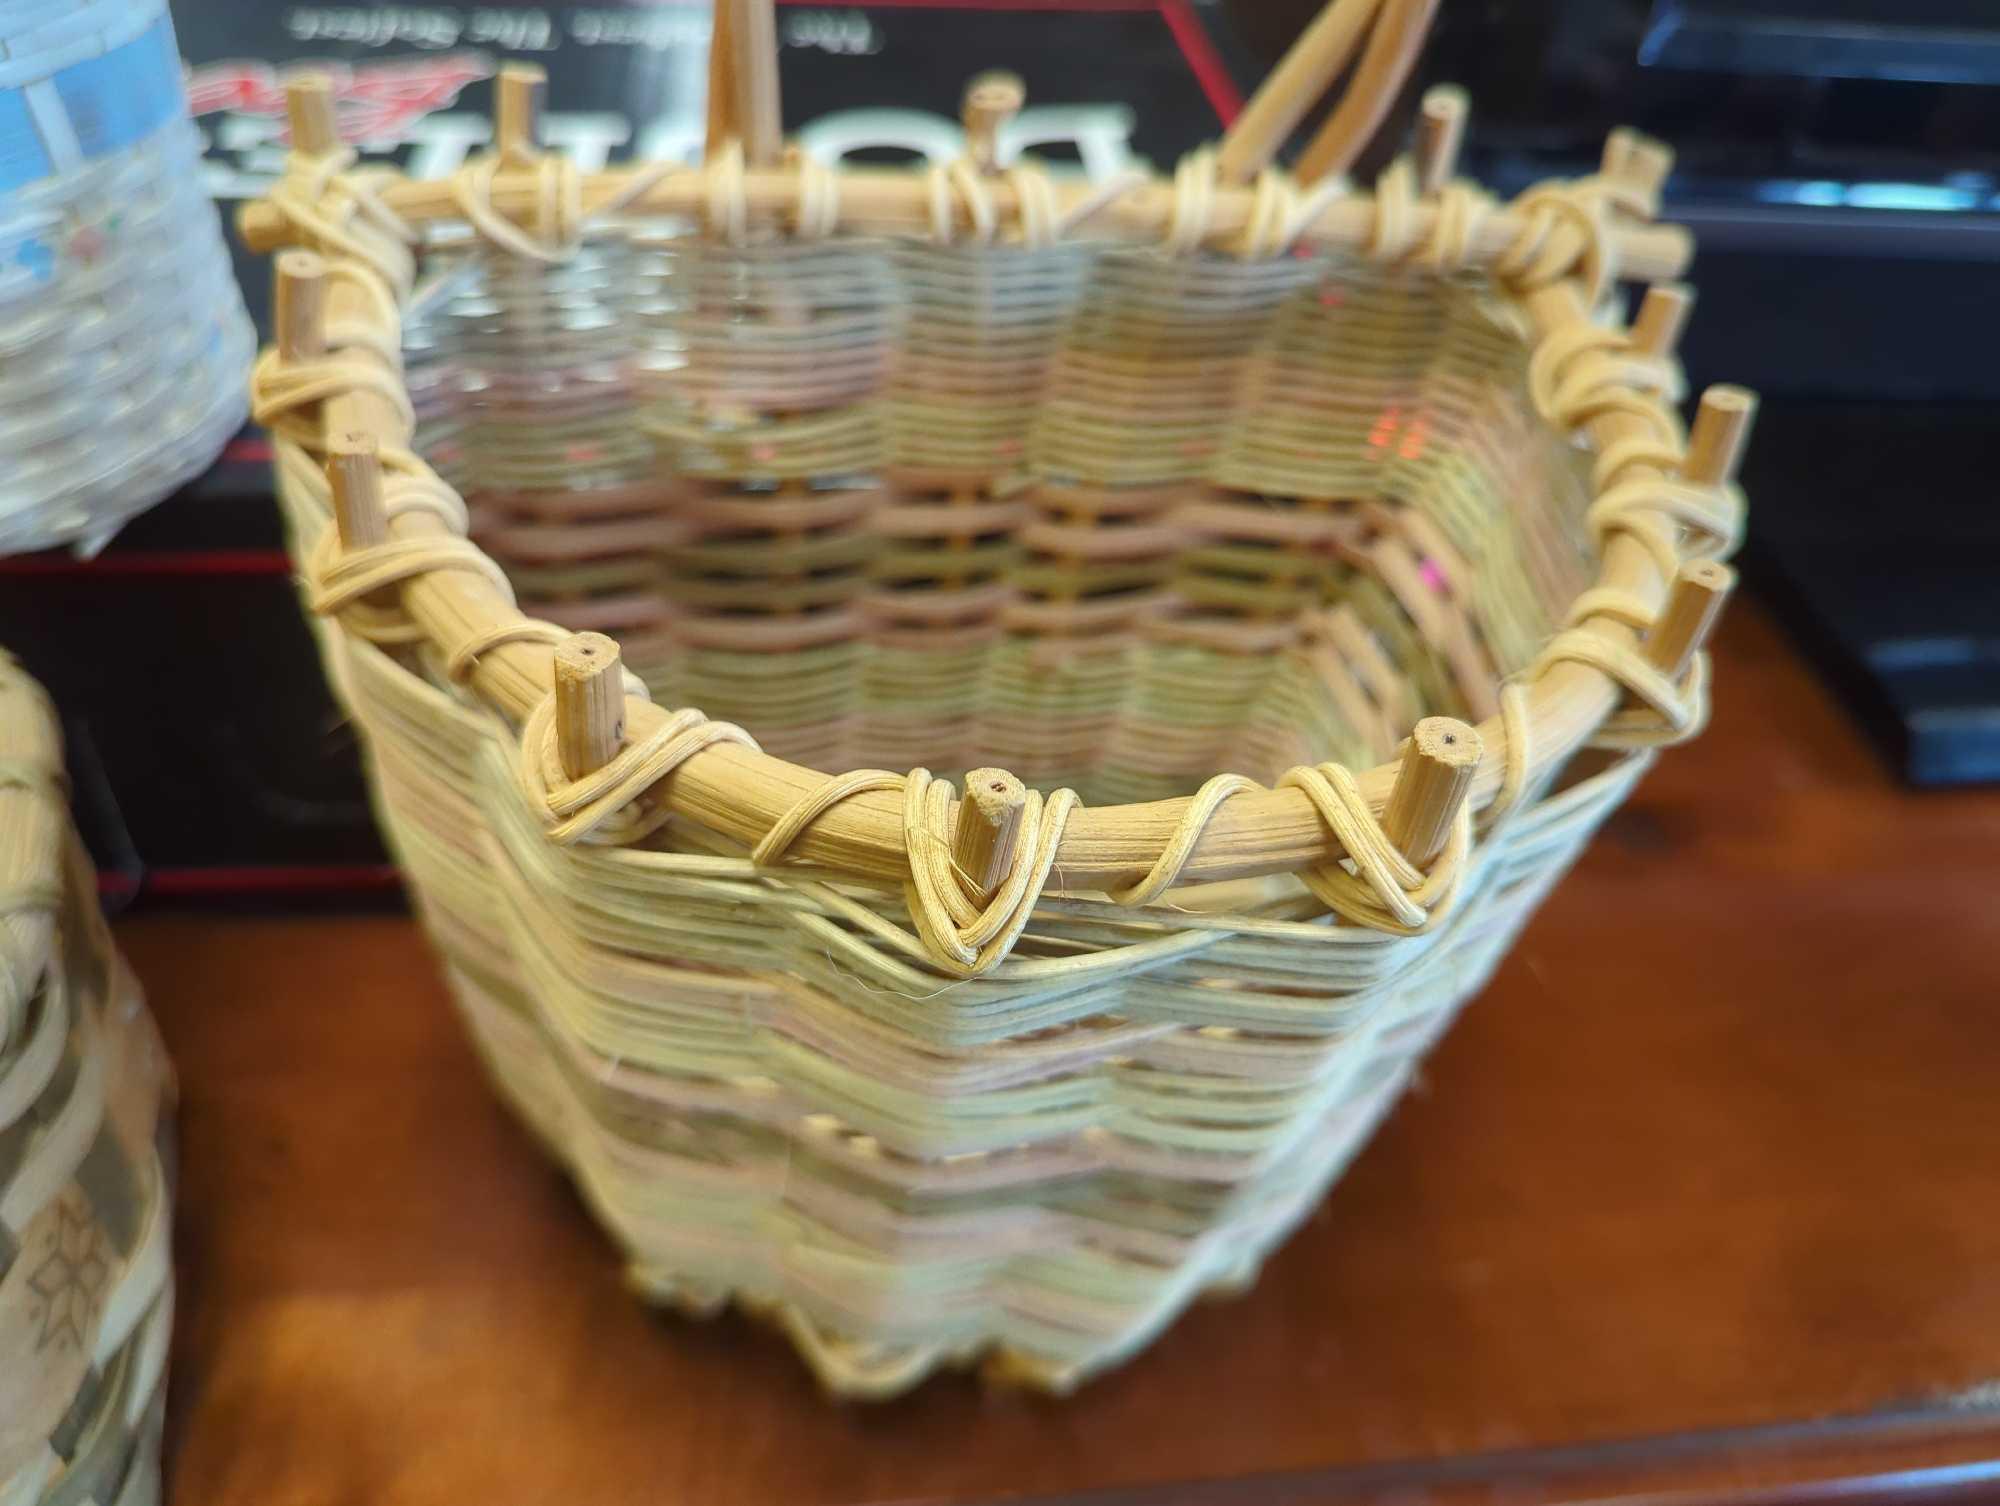 Lot of Assorted Baskets To Include, Double Basket Woven With One Handle Hand Painted White and Blue,